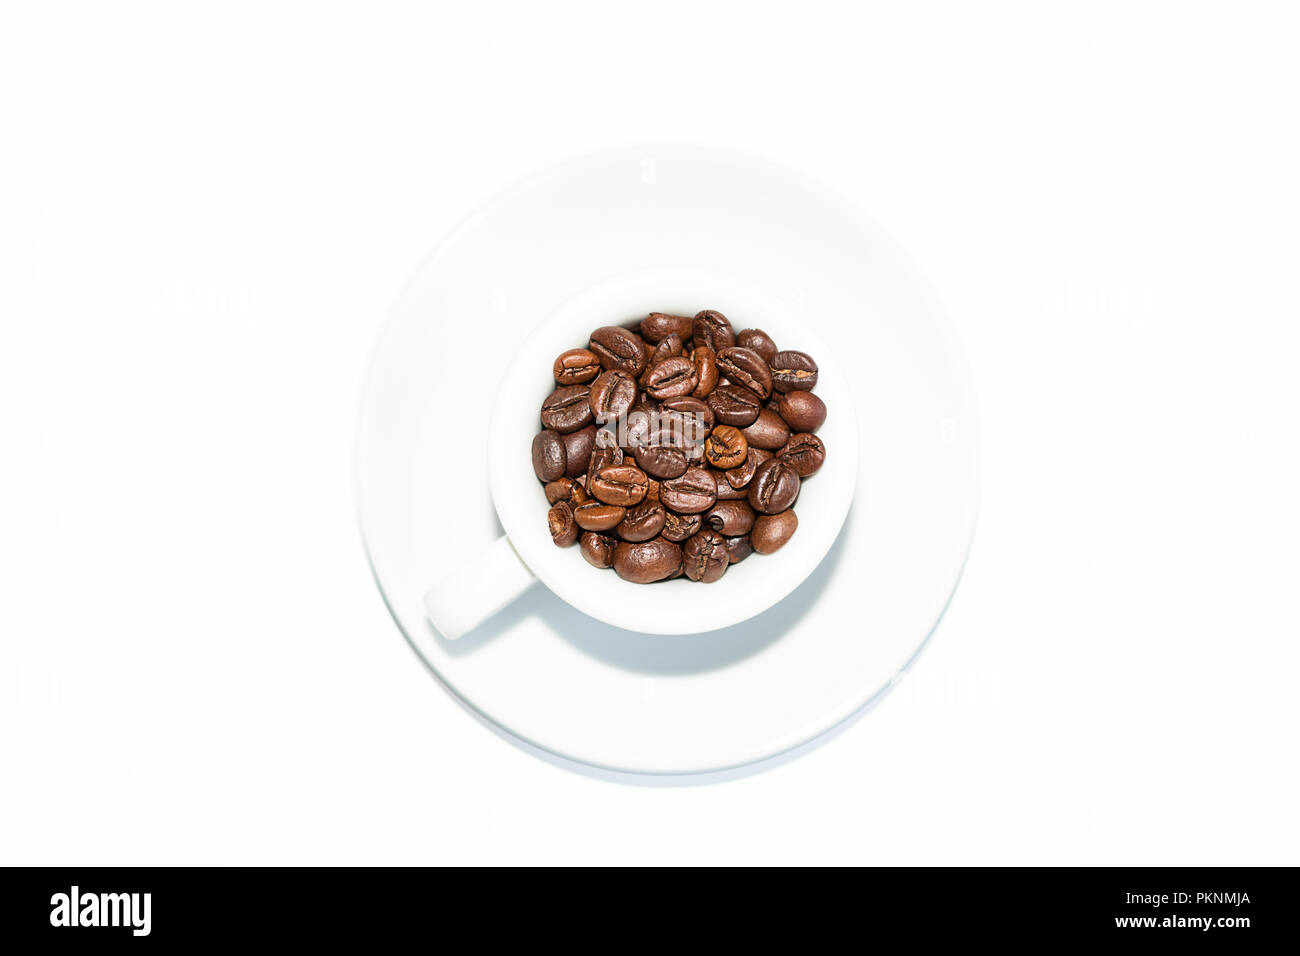 coffee cup full of roasted coffee beans and white background Stock Photo